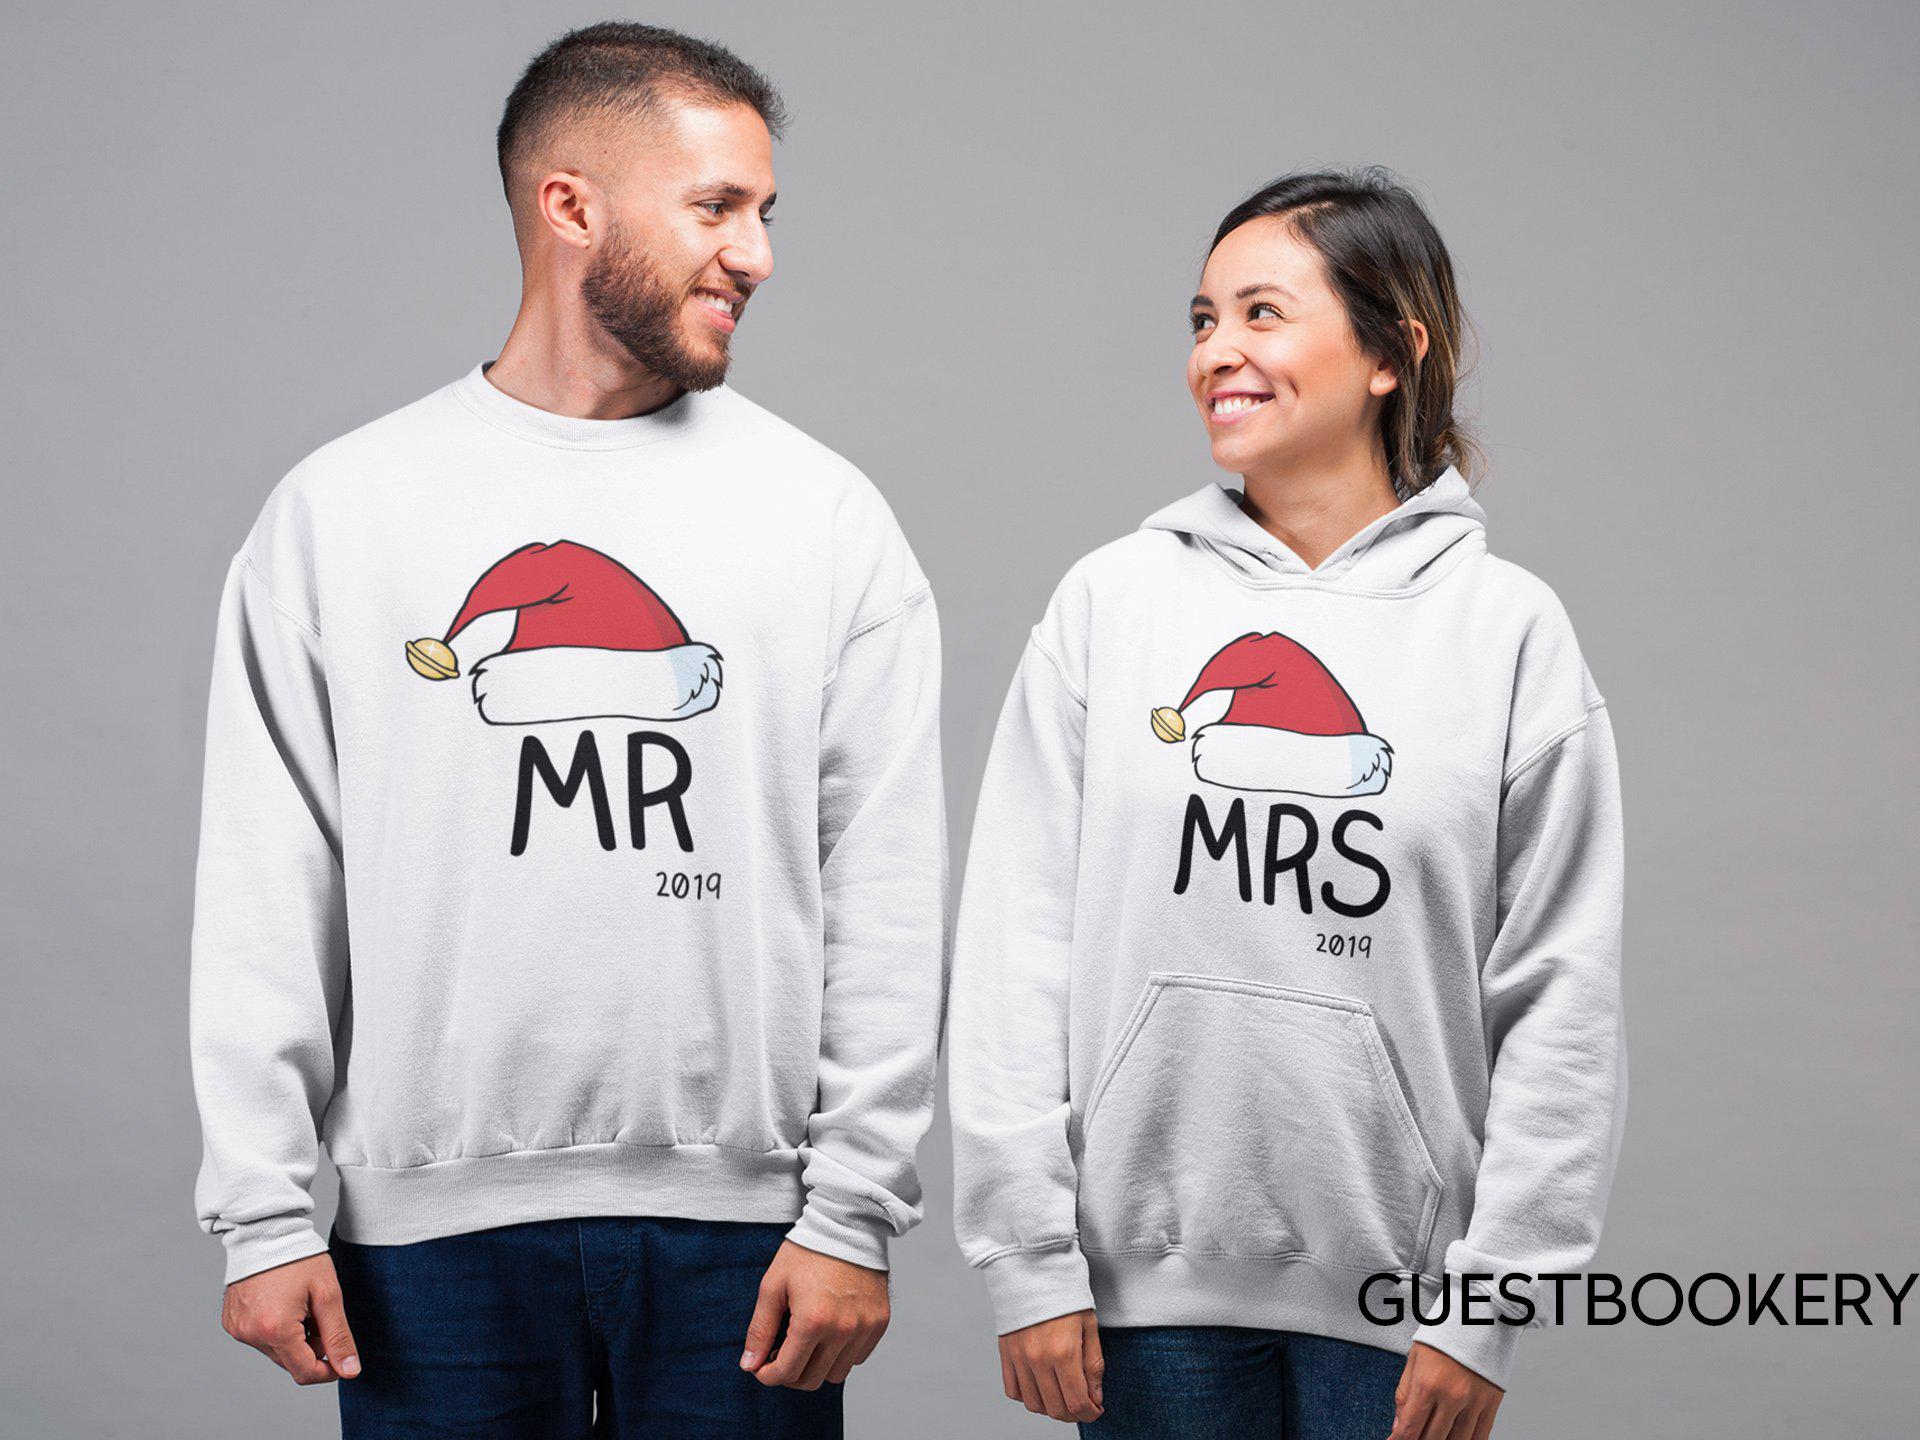 Mr and Mrs Christmas Hoodies - Guestbookery